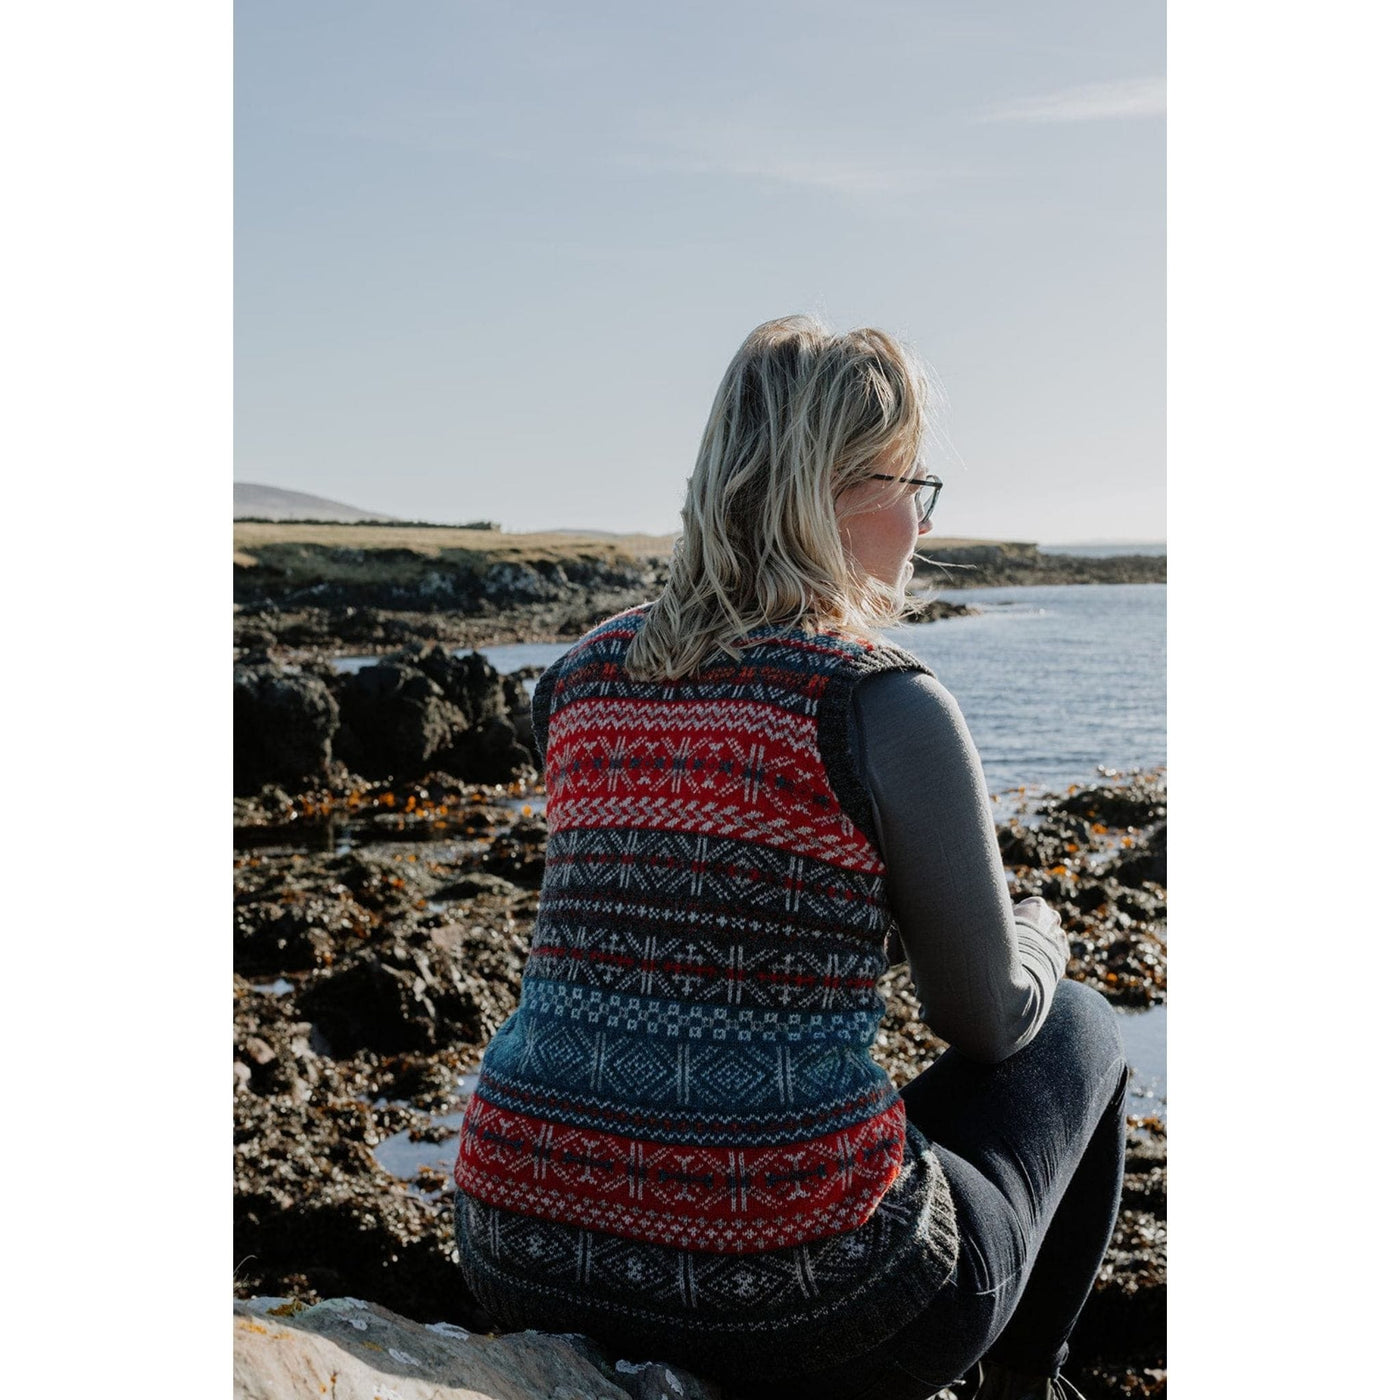 Page of Shetland Wool Adventure Journal 4, showing back view of woman wearing colorwork sleeveless sweater which is a pattern in the book.